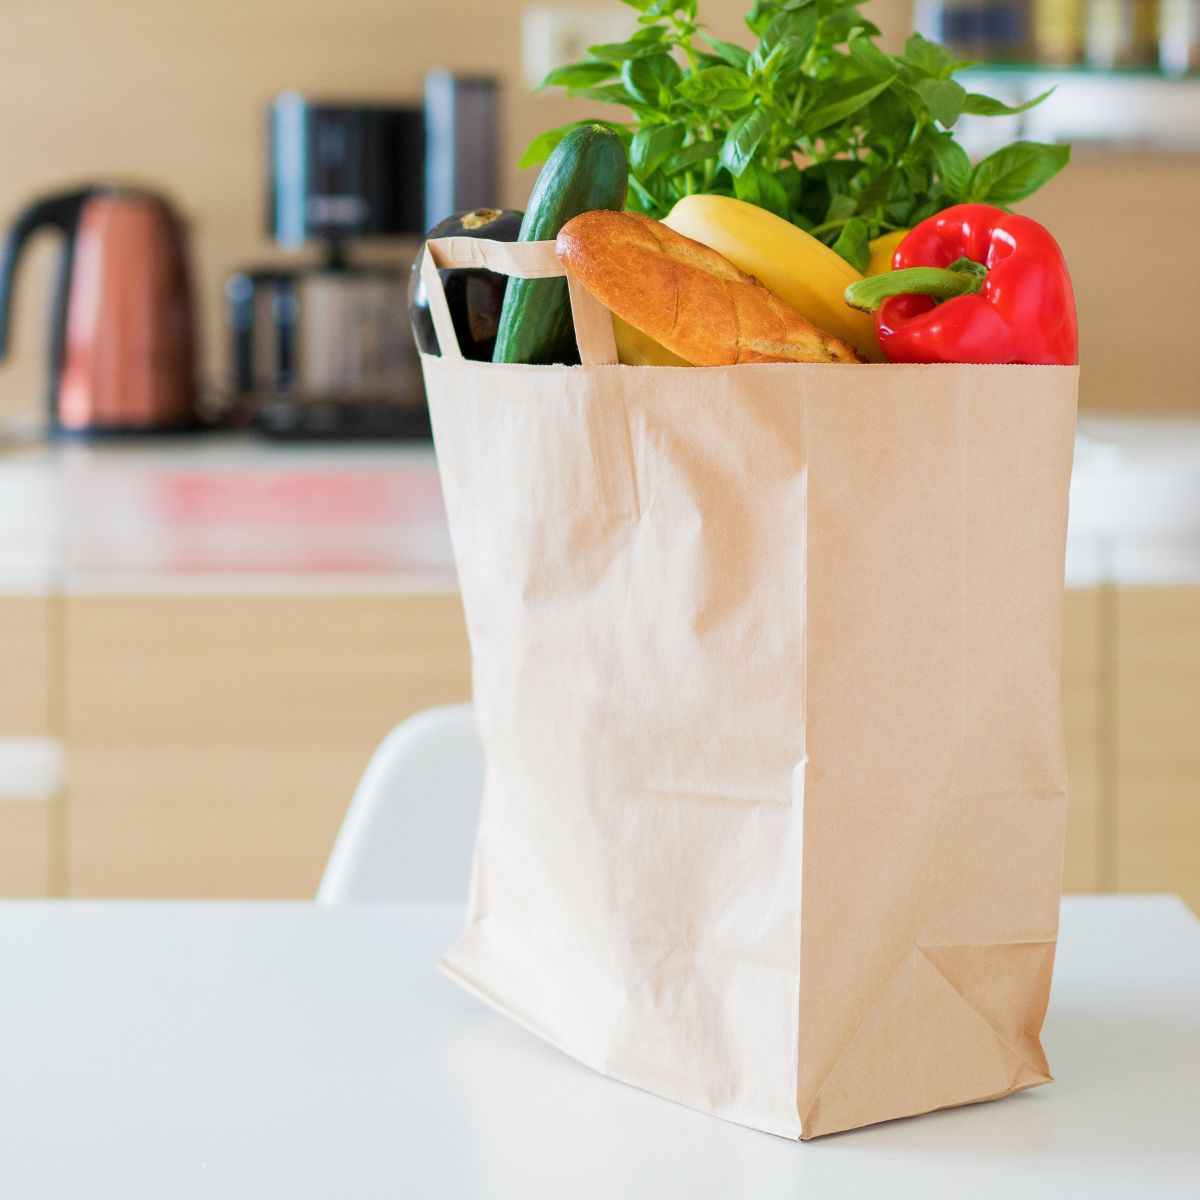 A bag of groceries sits on the kitchen counter.